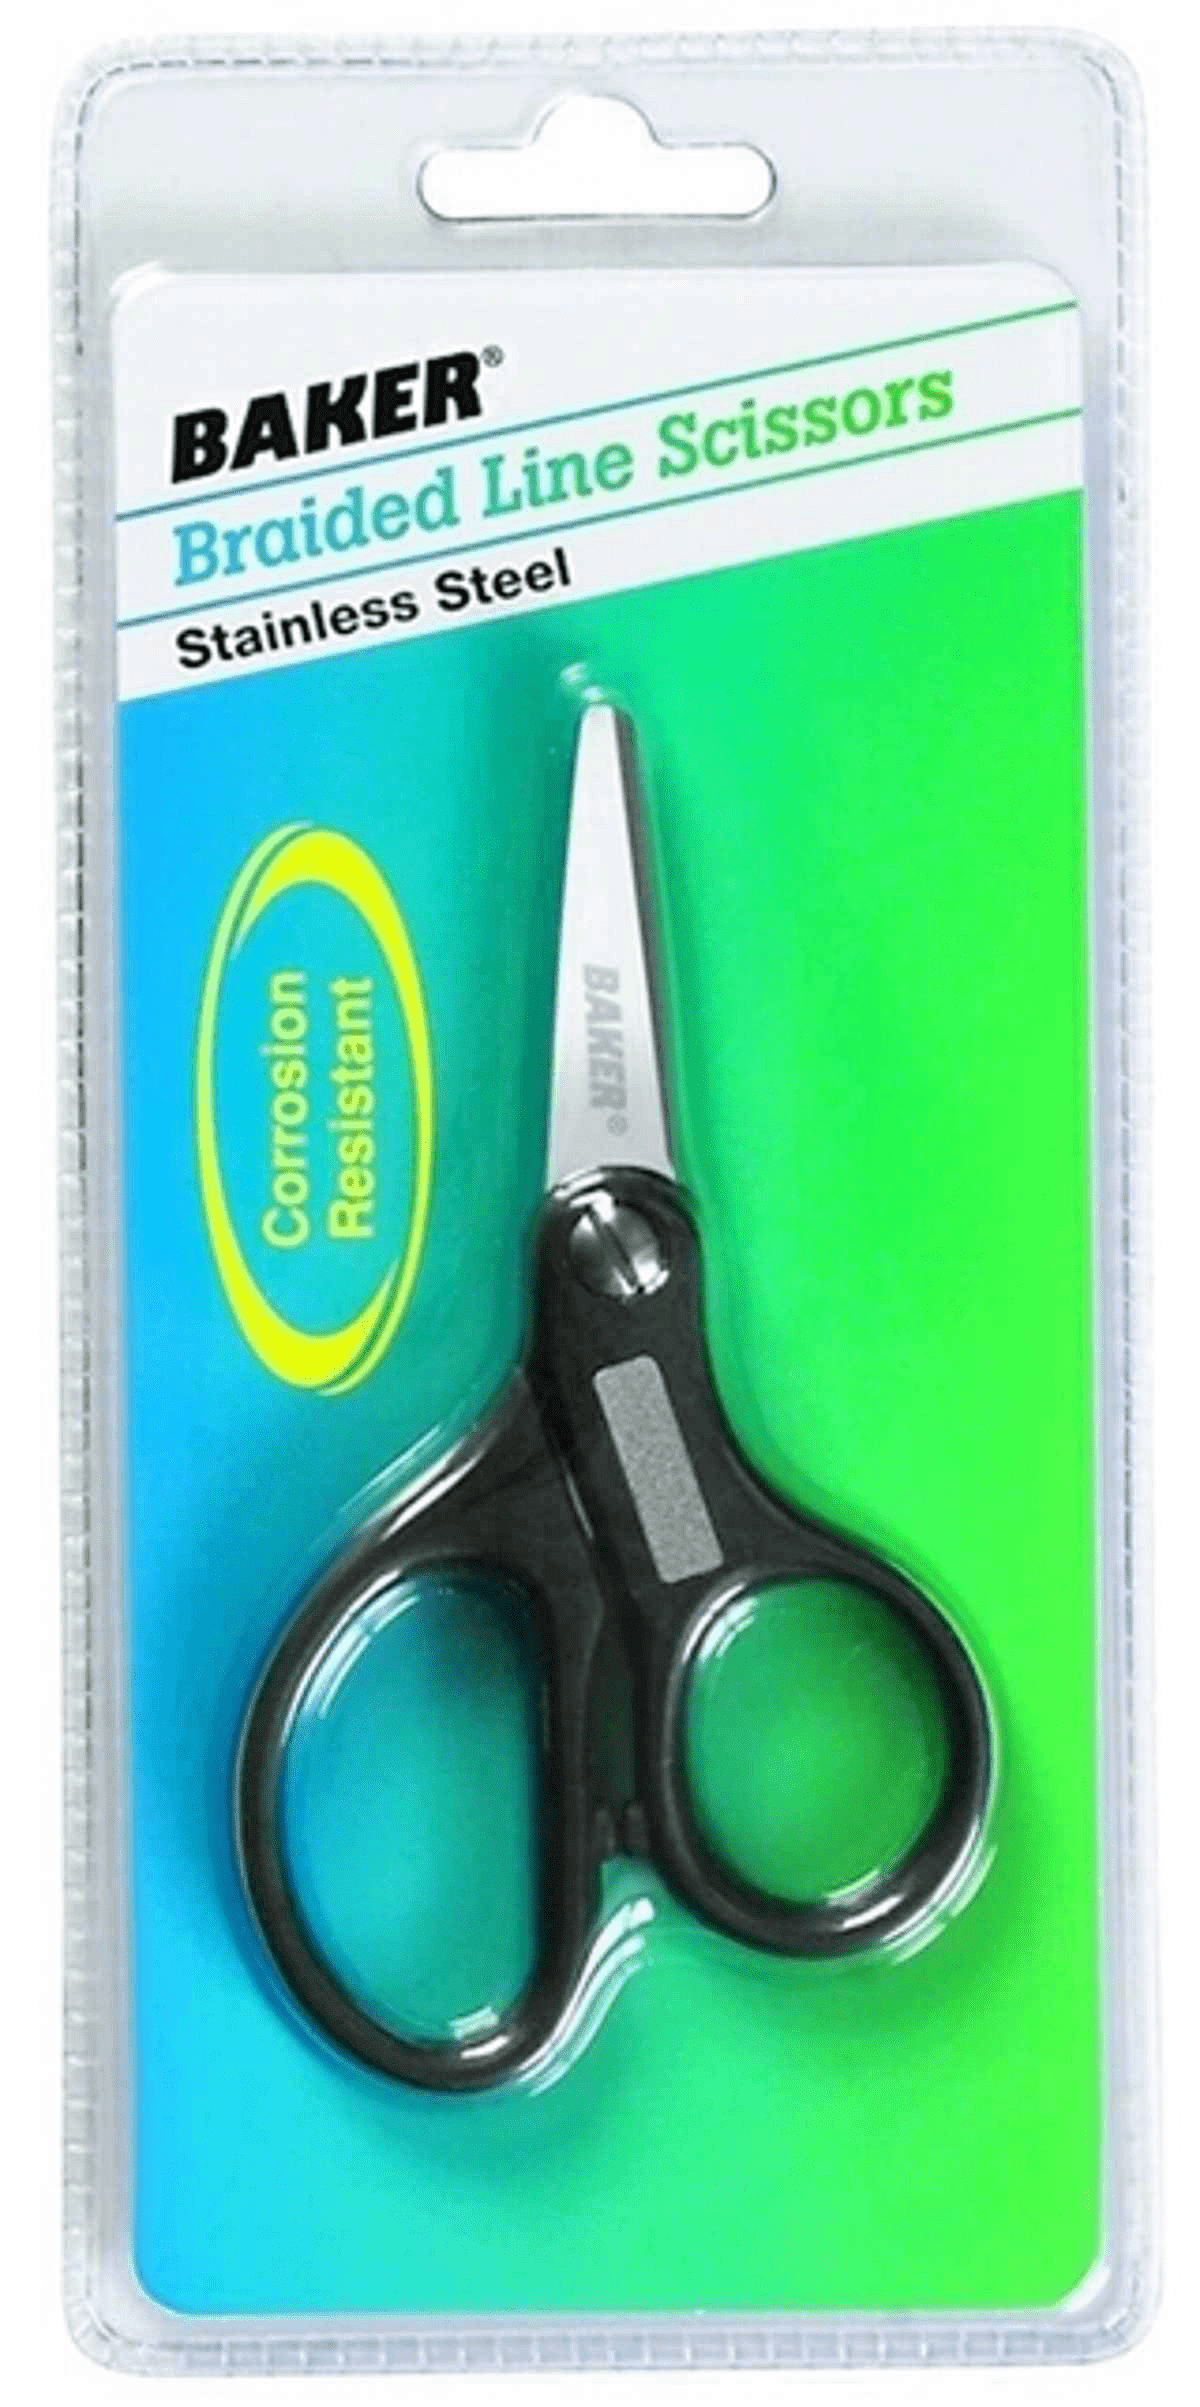 Baker Braided Line Scissors Stainless Steel - Clancy Outdoors